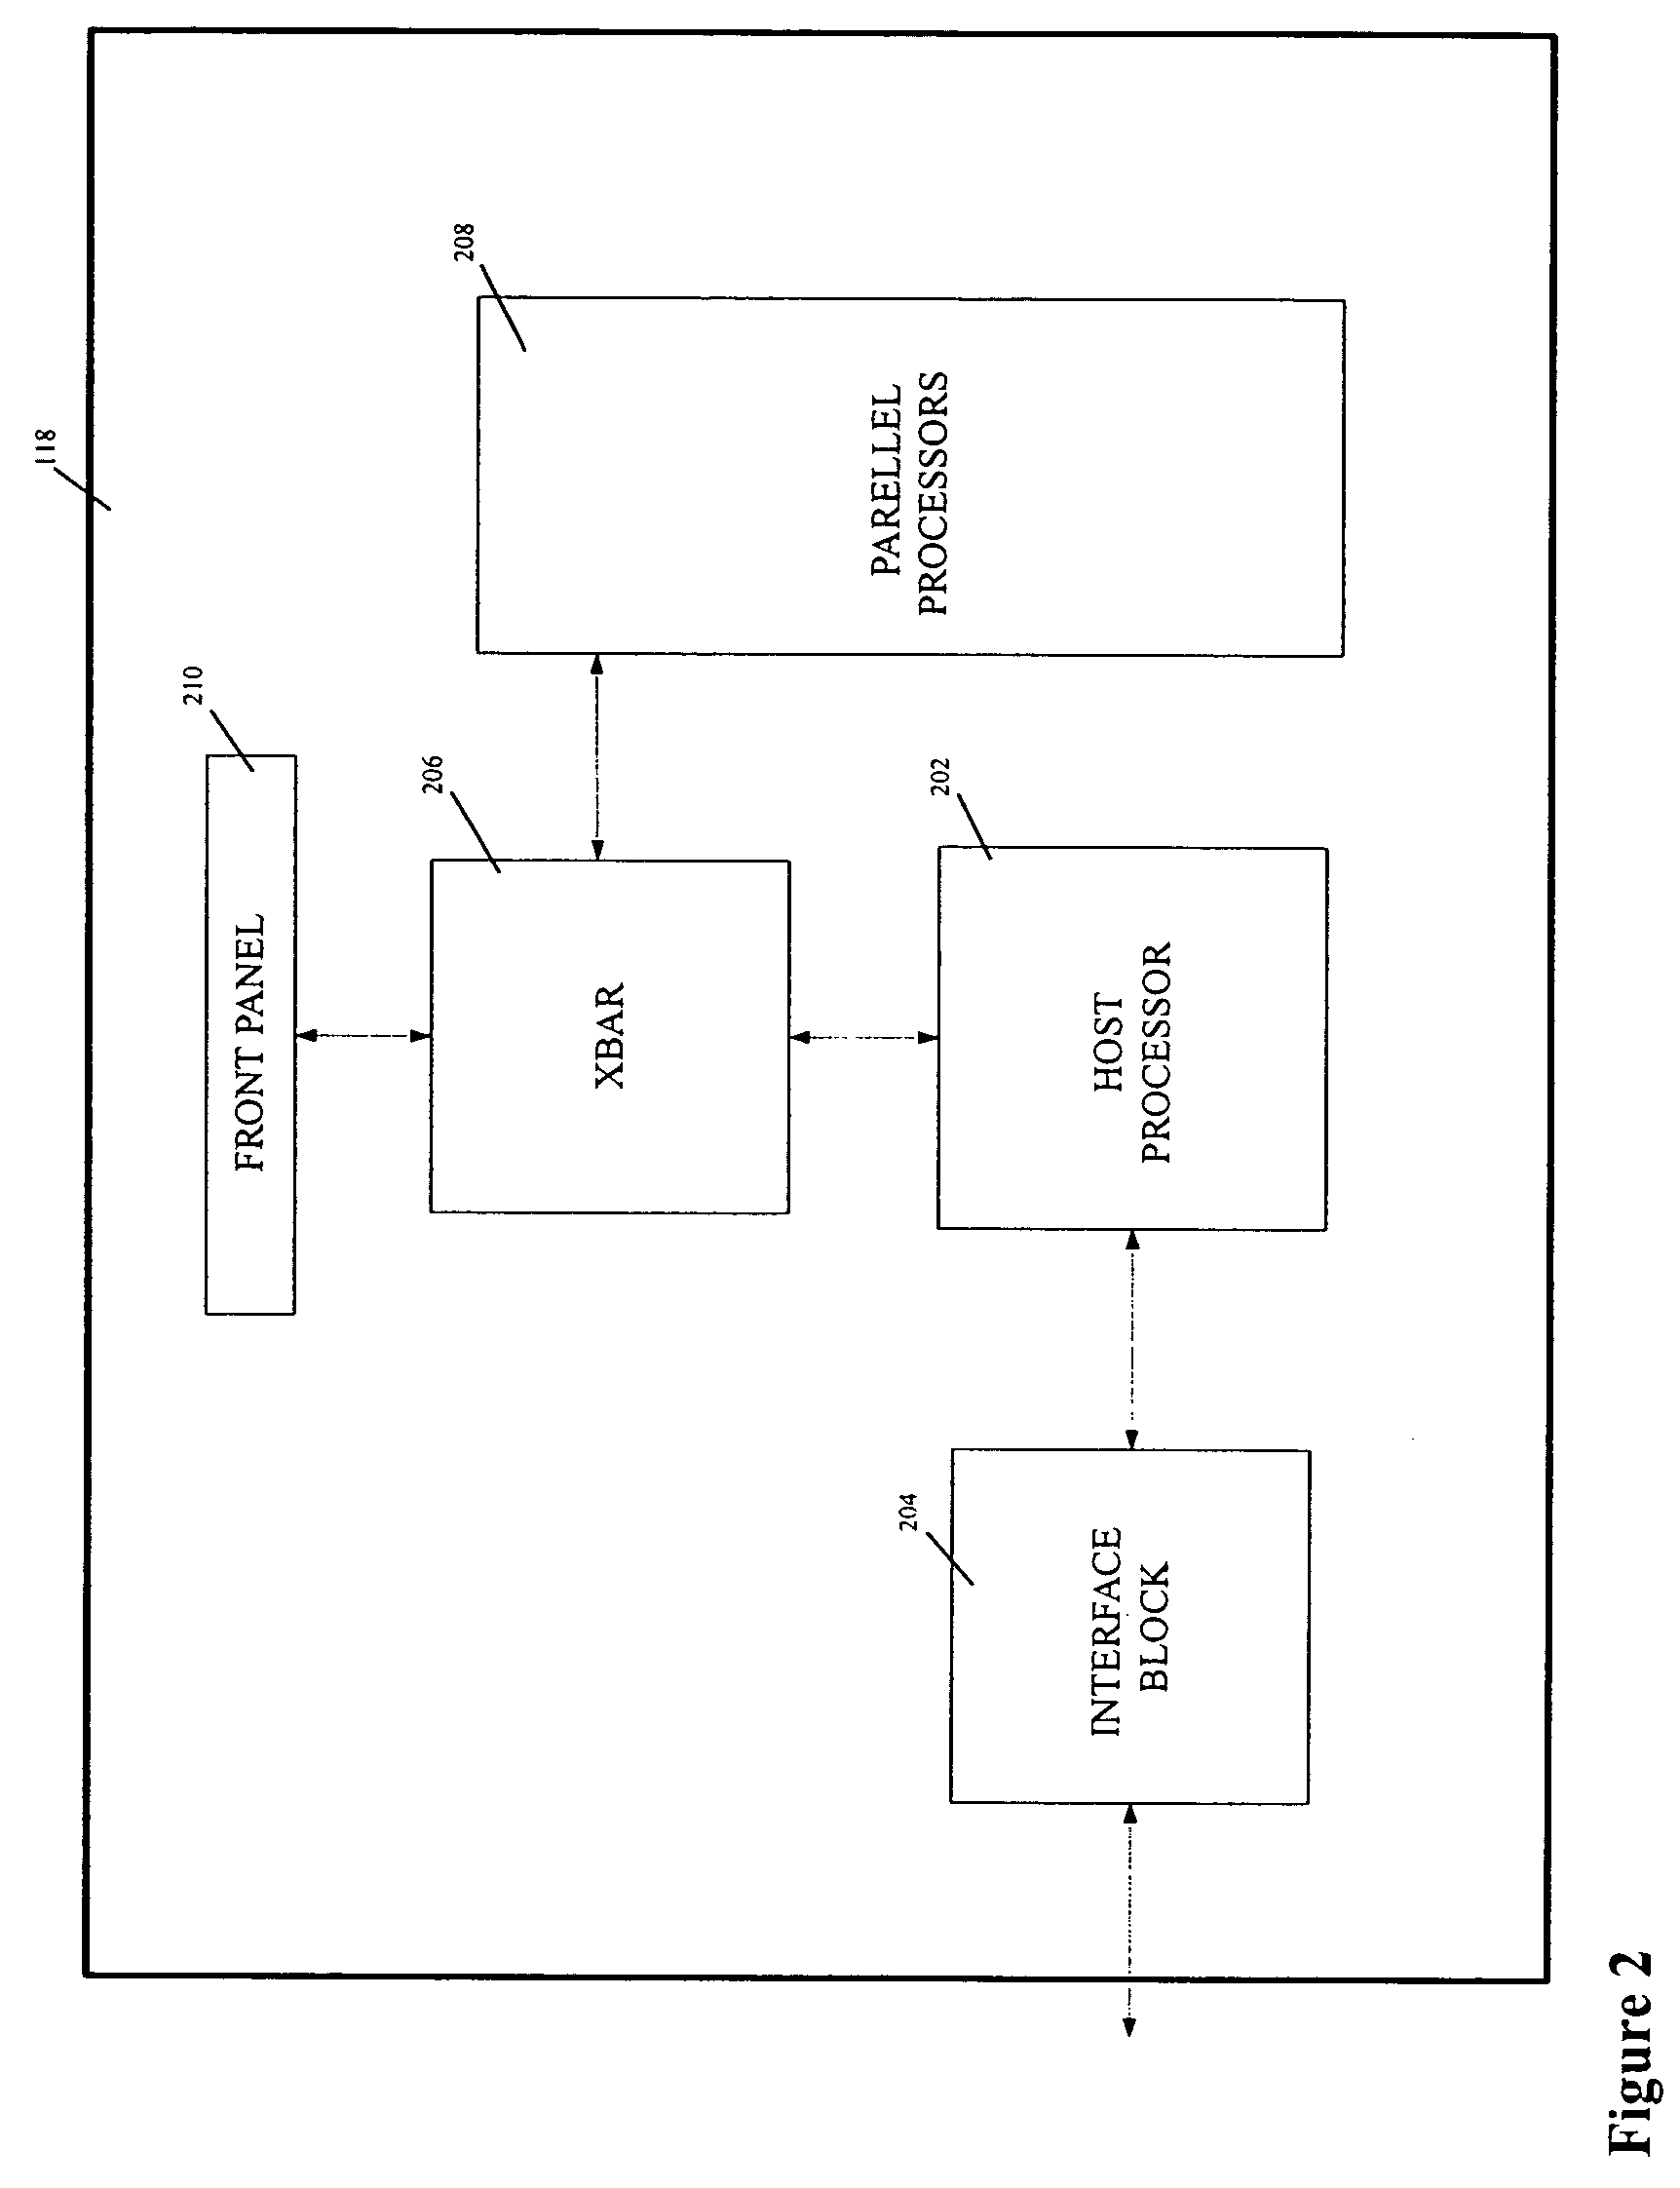 Hardware and software for performing computations in a short-code spread-spectrum communications system